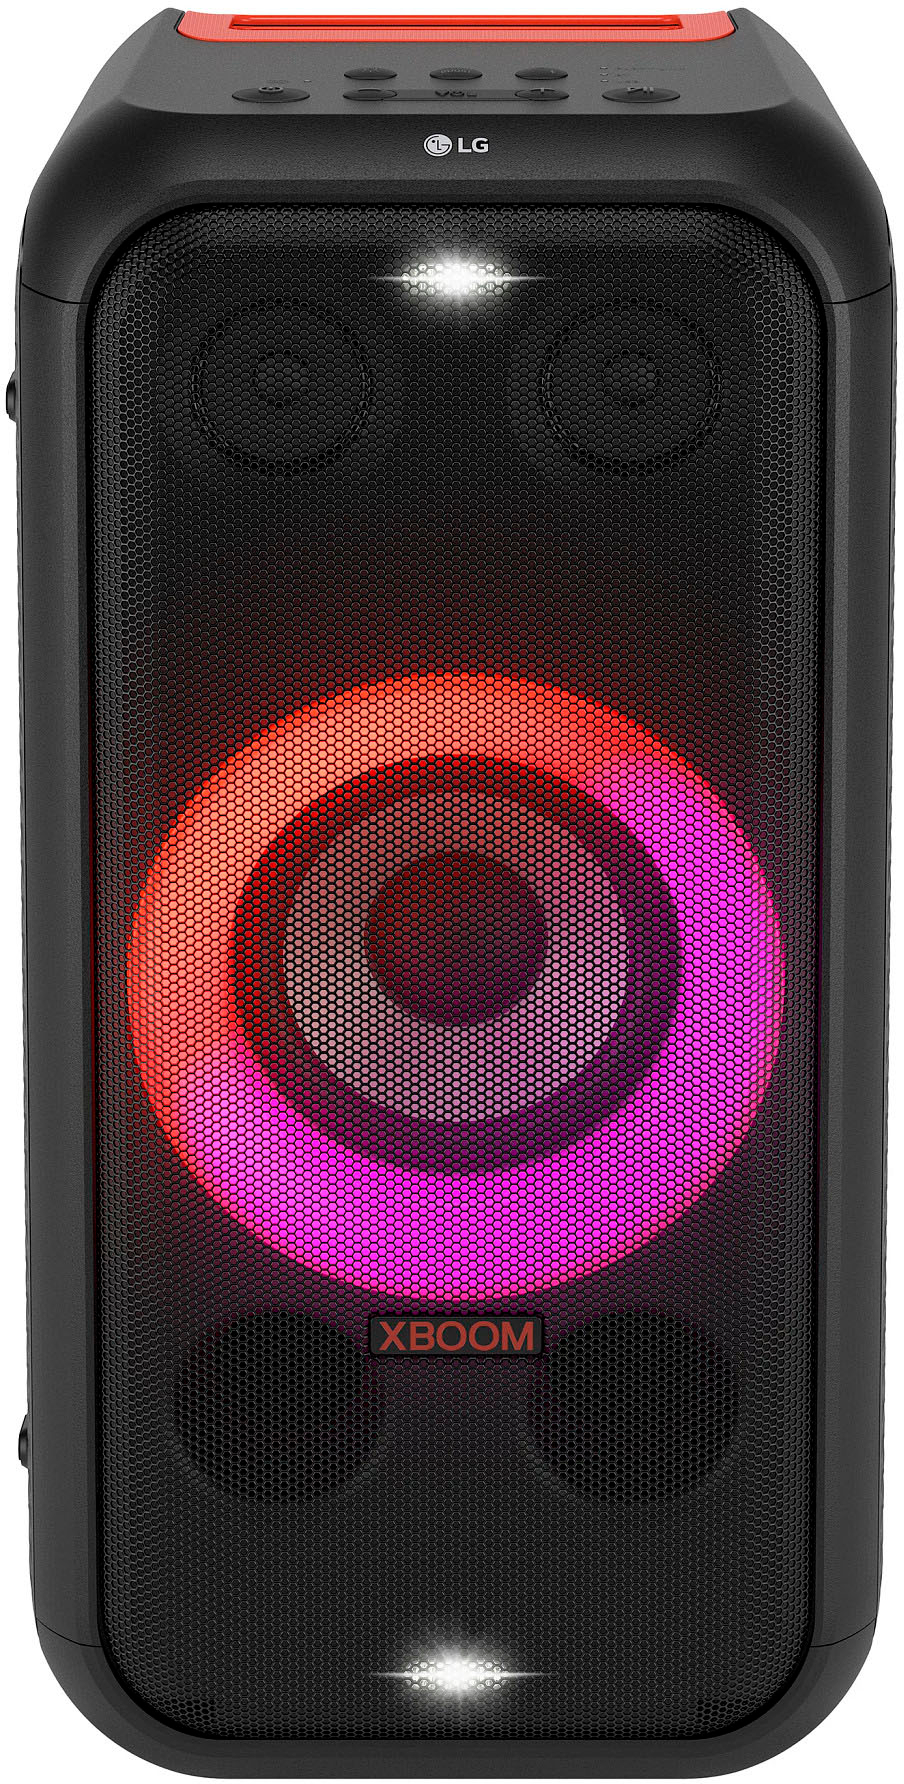 LG Xboom Party Speakers: Great Sound Quality